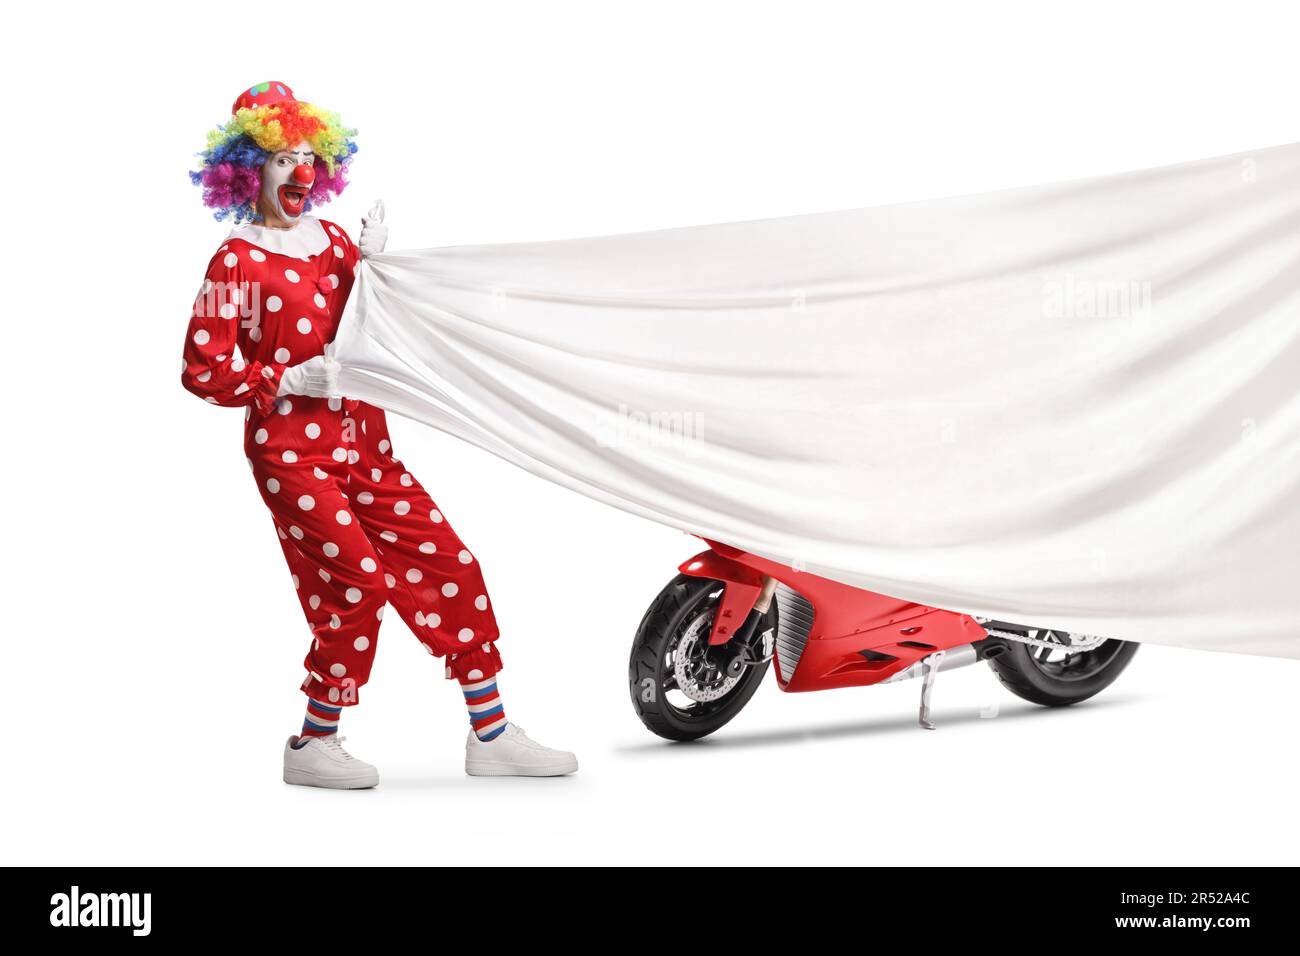 Clown pulling a big white cloth in front of a red motorcycle isolated on white background Stock Photo